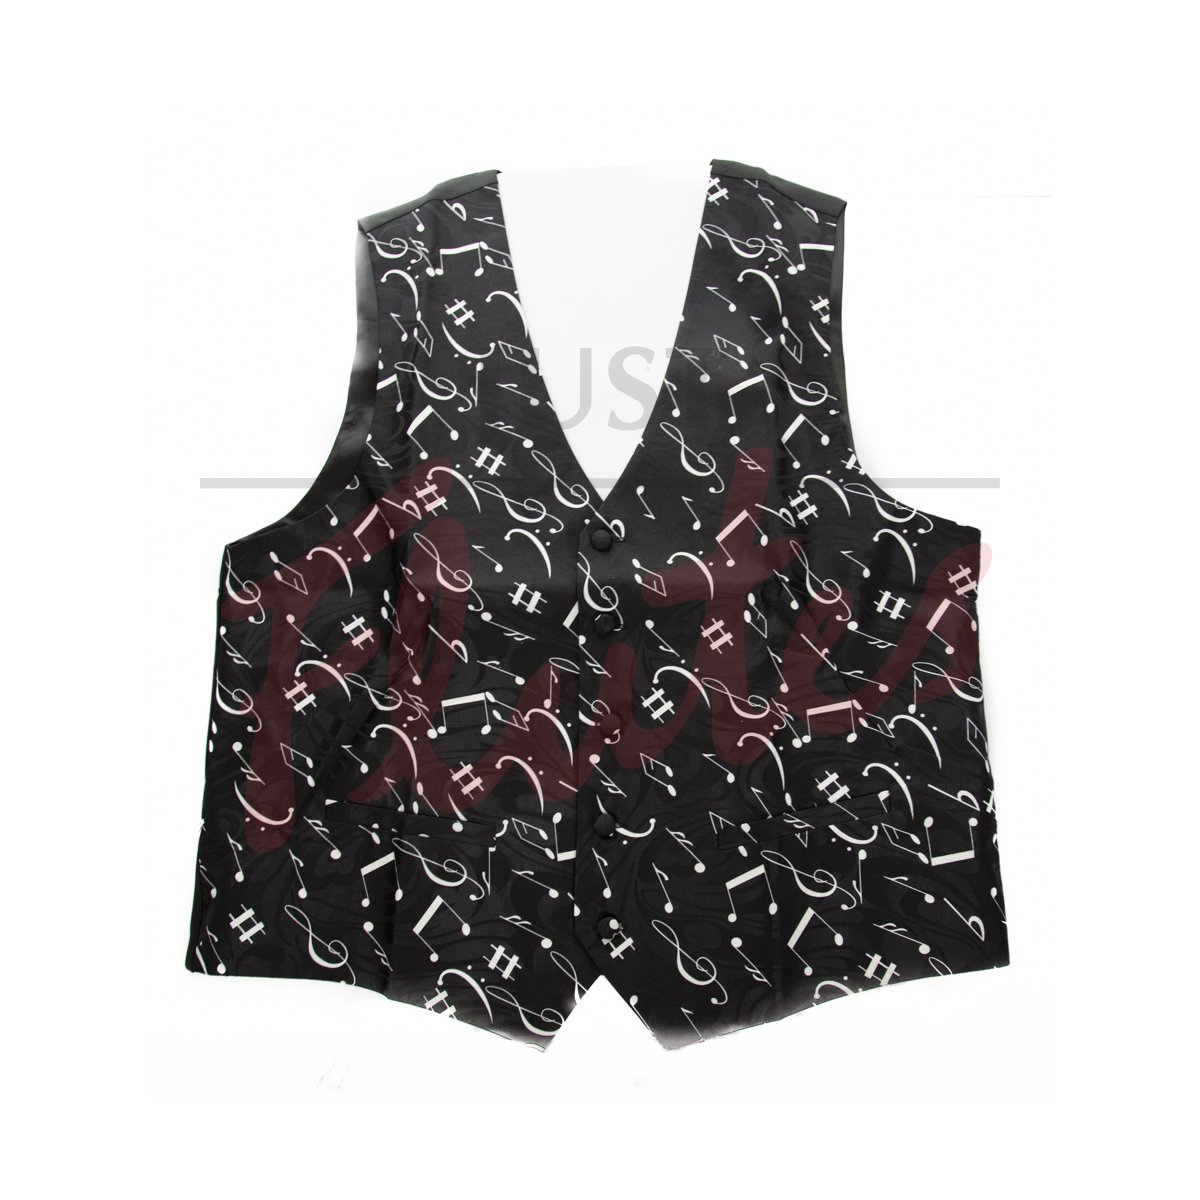 Tie Studio Music Waistcoat, Black with White Notes, L Size